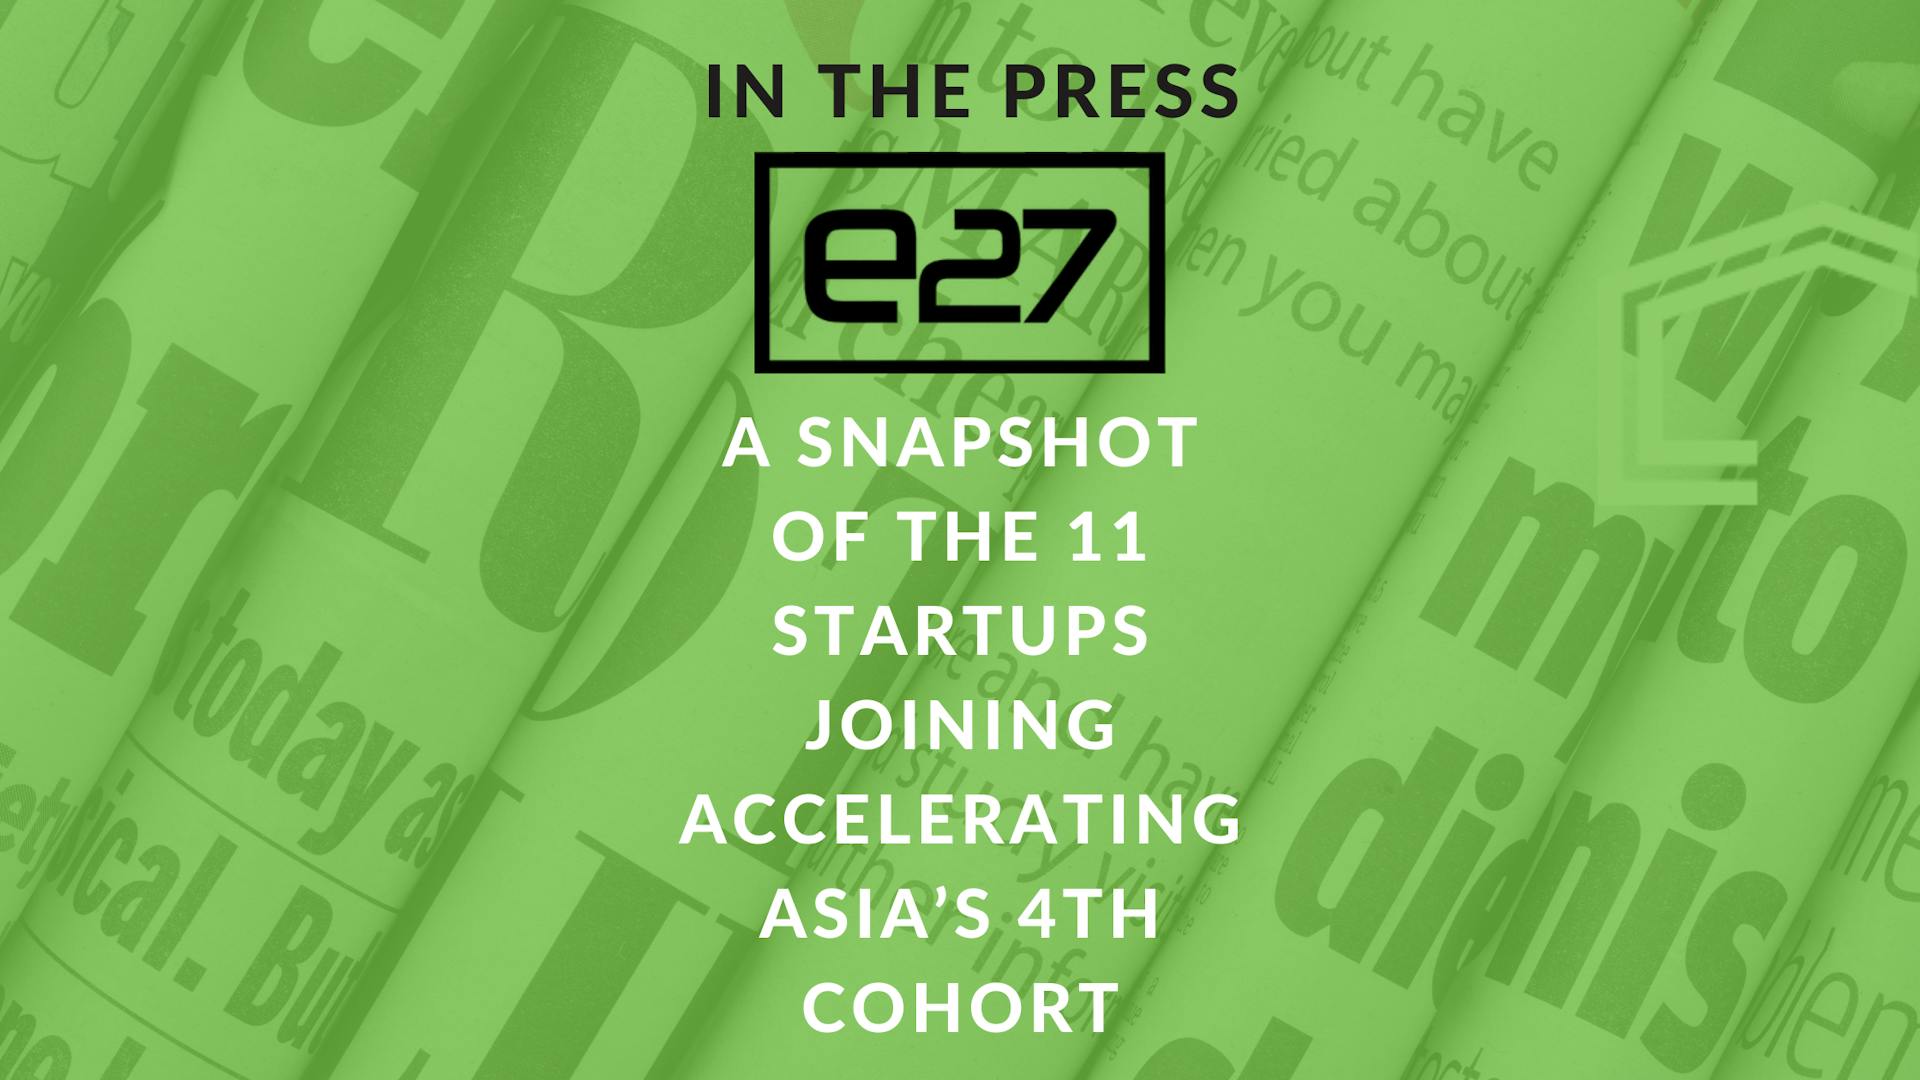 e27's article about the 11 startups joining Accelerating Asia’s 4th cohort